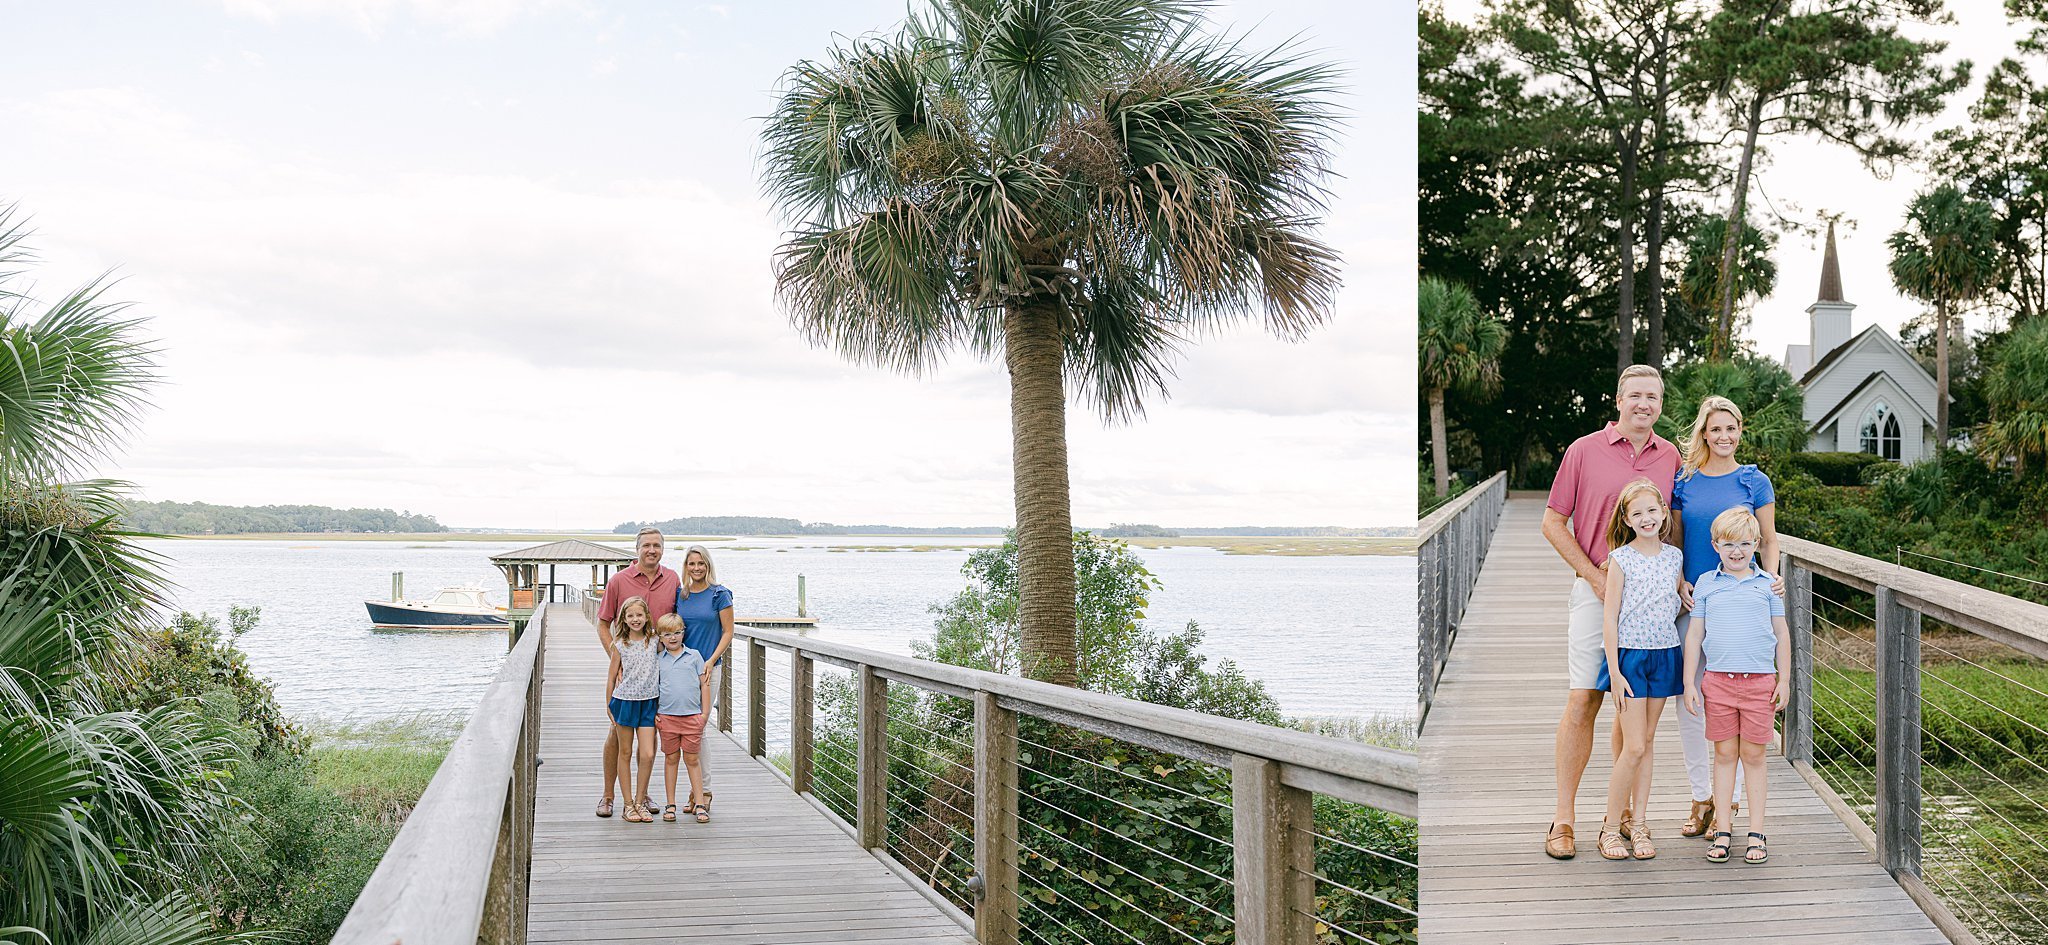 Katherine_Ives_Photography_Patton_Family_Montage_Palmetto_Bluff_10248.JPG